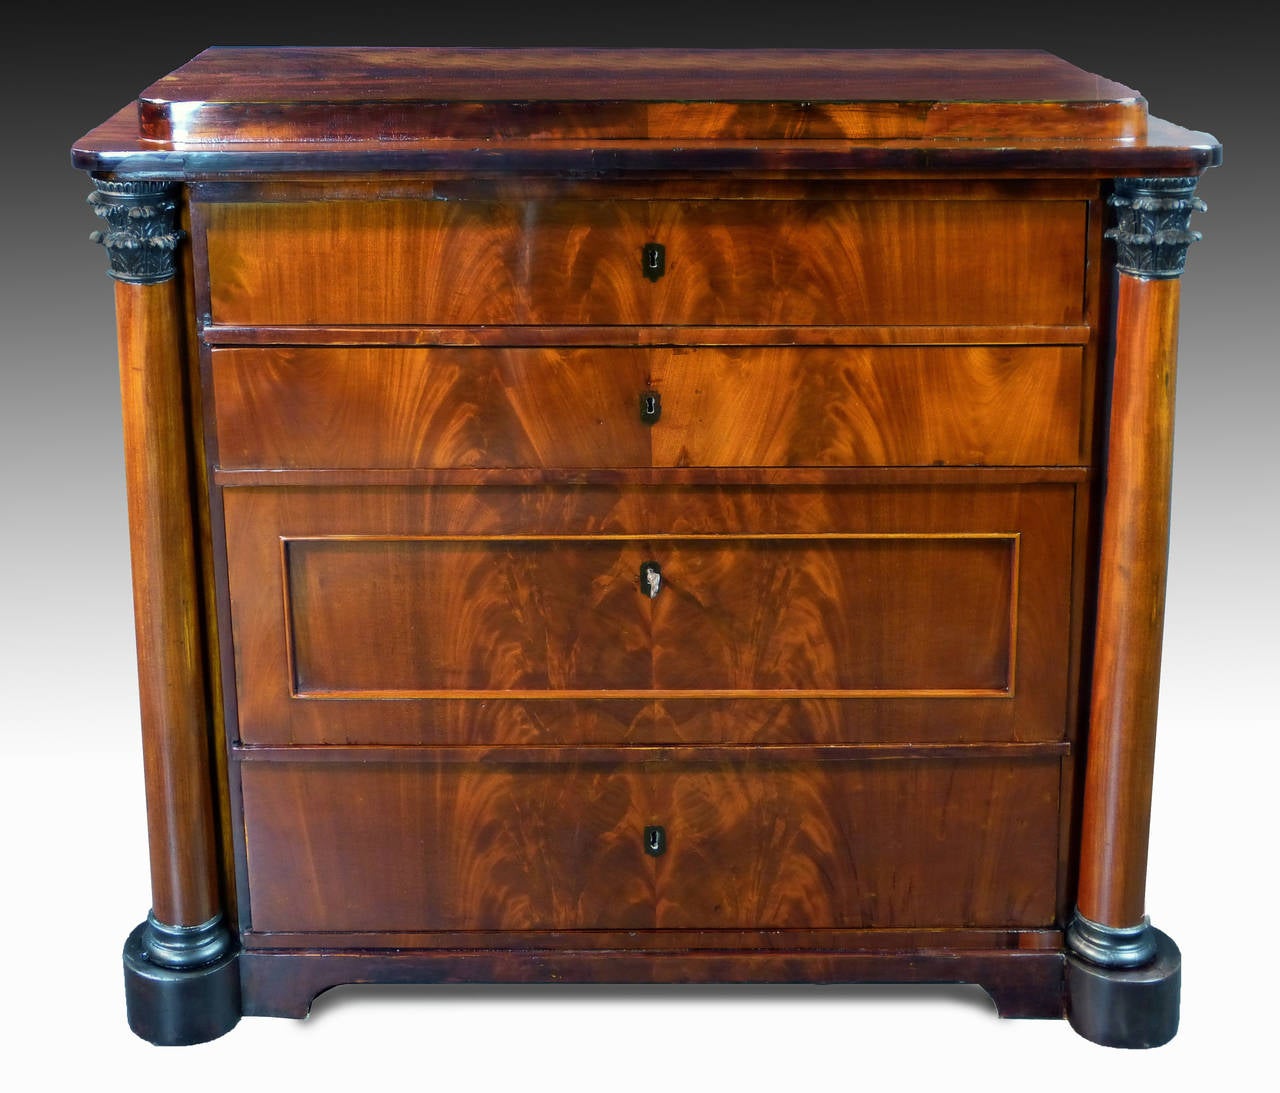 Early Biedermeier figured mahogany commode of Danish origin dating to the first quarter of the 19th century with two Corinthian columns flanking four drawers. The columns have Corinthian tops and bases that are carved wood and are ebonised. Three of